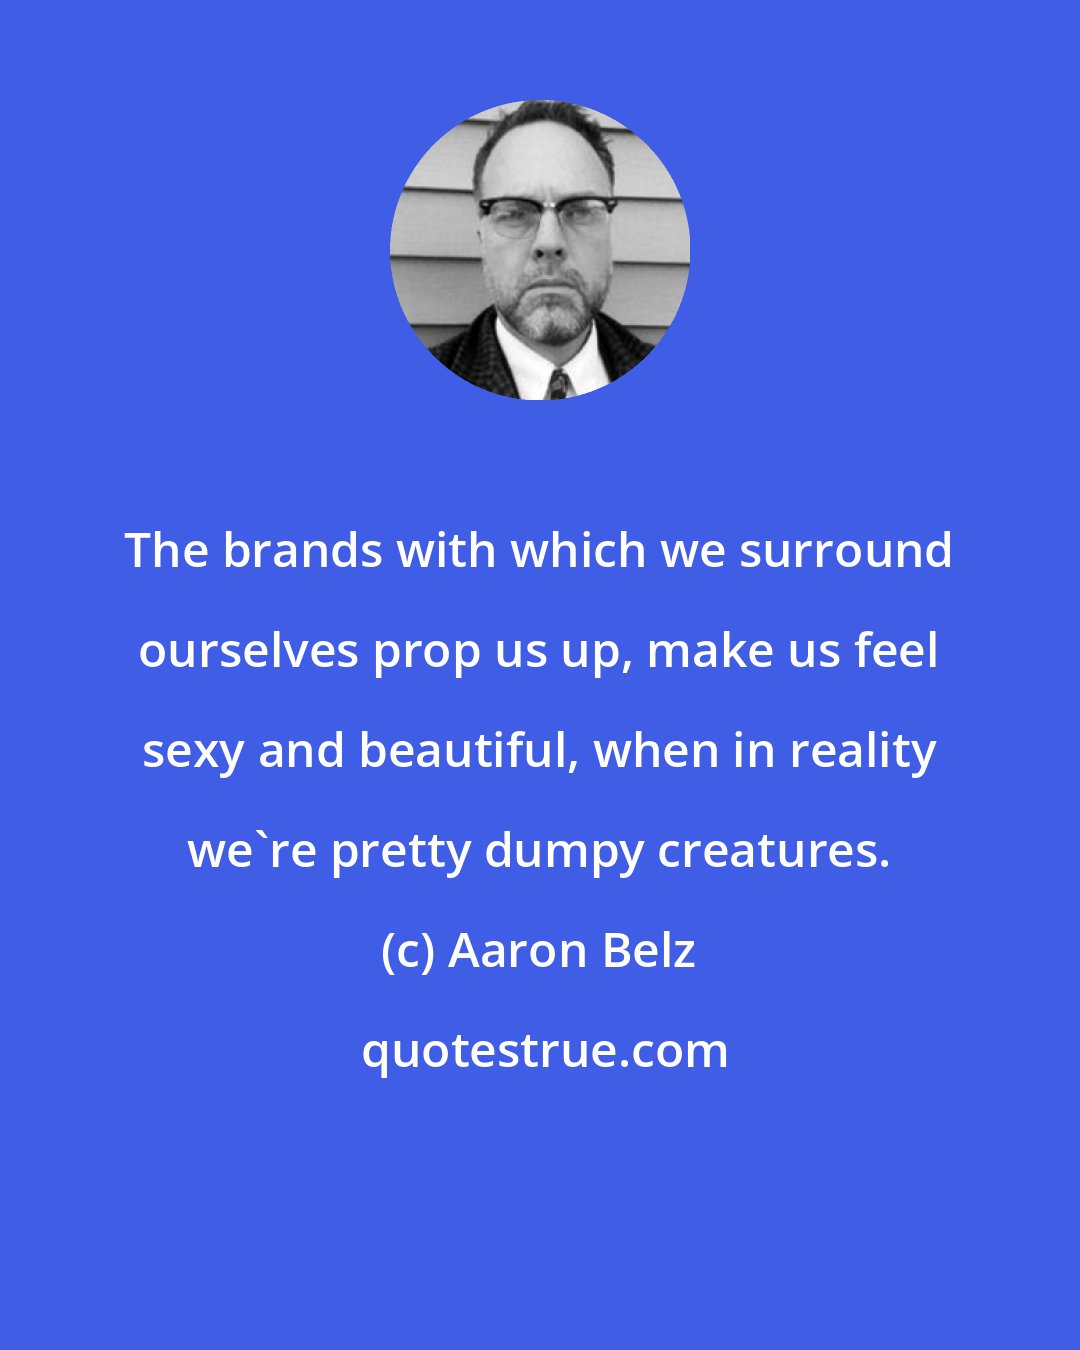 Aaron Belz: The brands with which we surround ourselves prop us up, make us feel sexy and beautiful, when in reality we're pretty dumpy creatures.